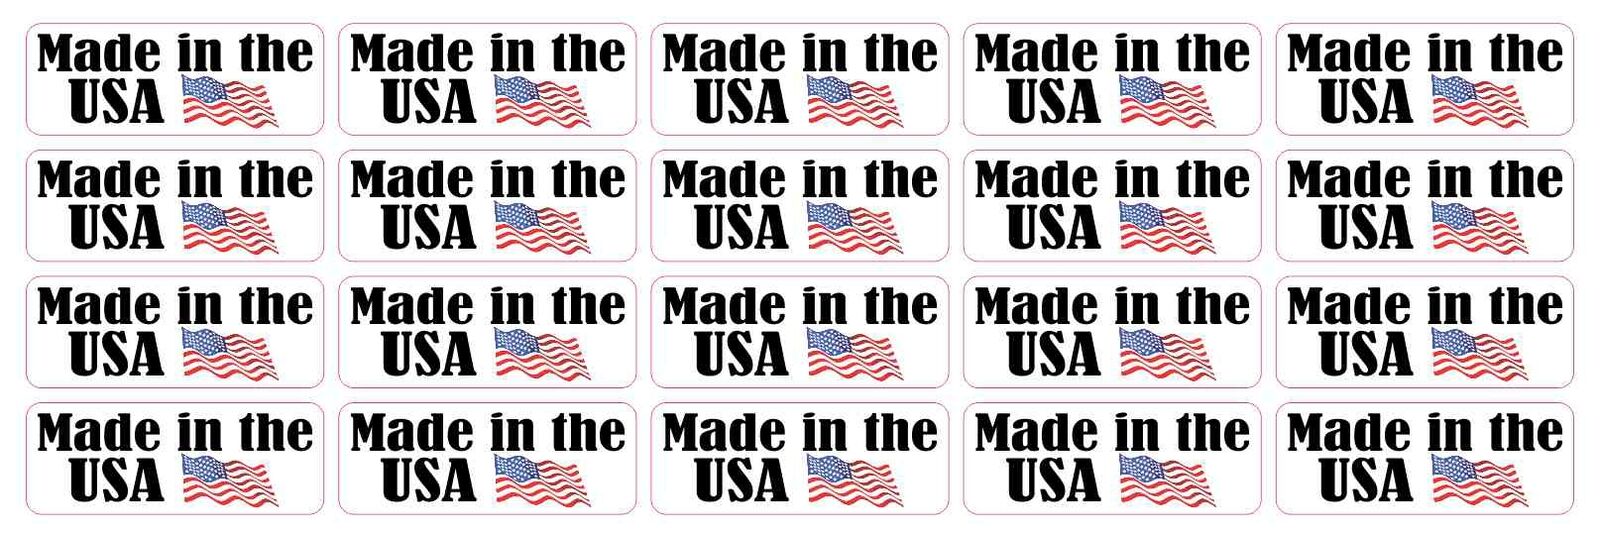 [20X] 2in x 0.75in Made in the USA Stickers Vinyl Business Product Labels Decals